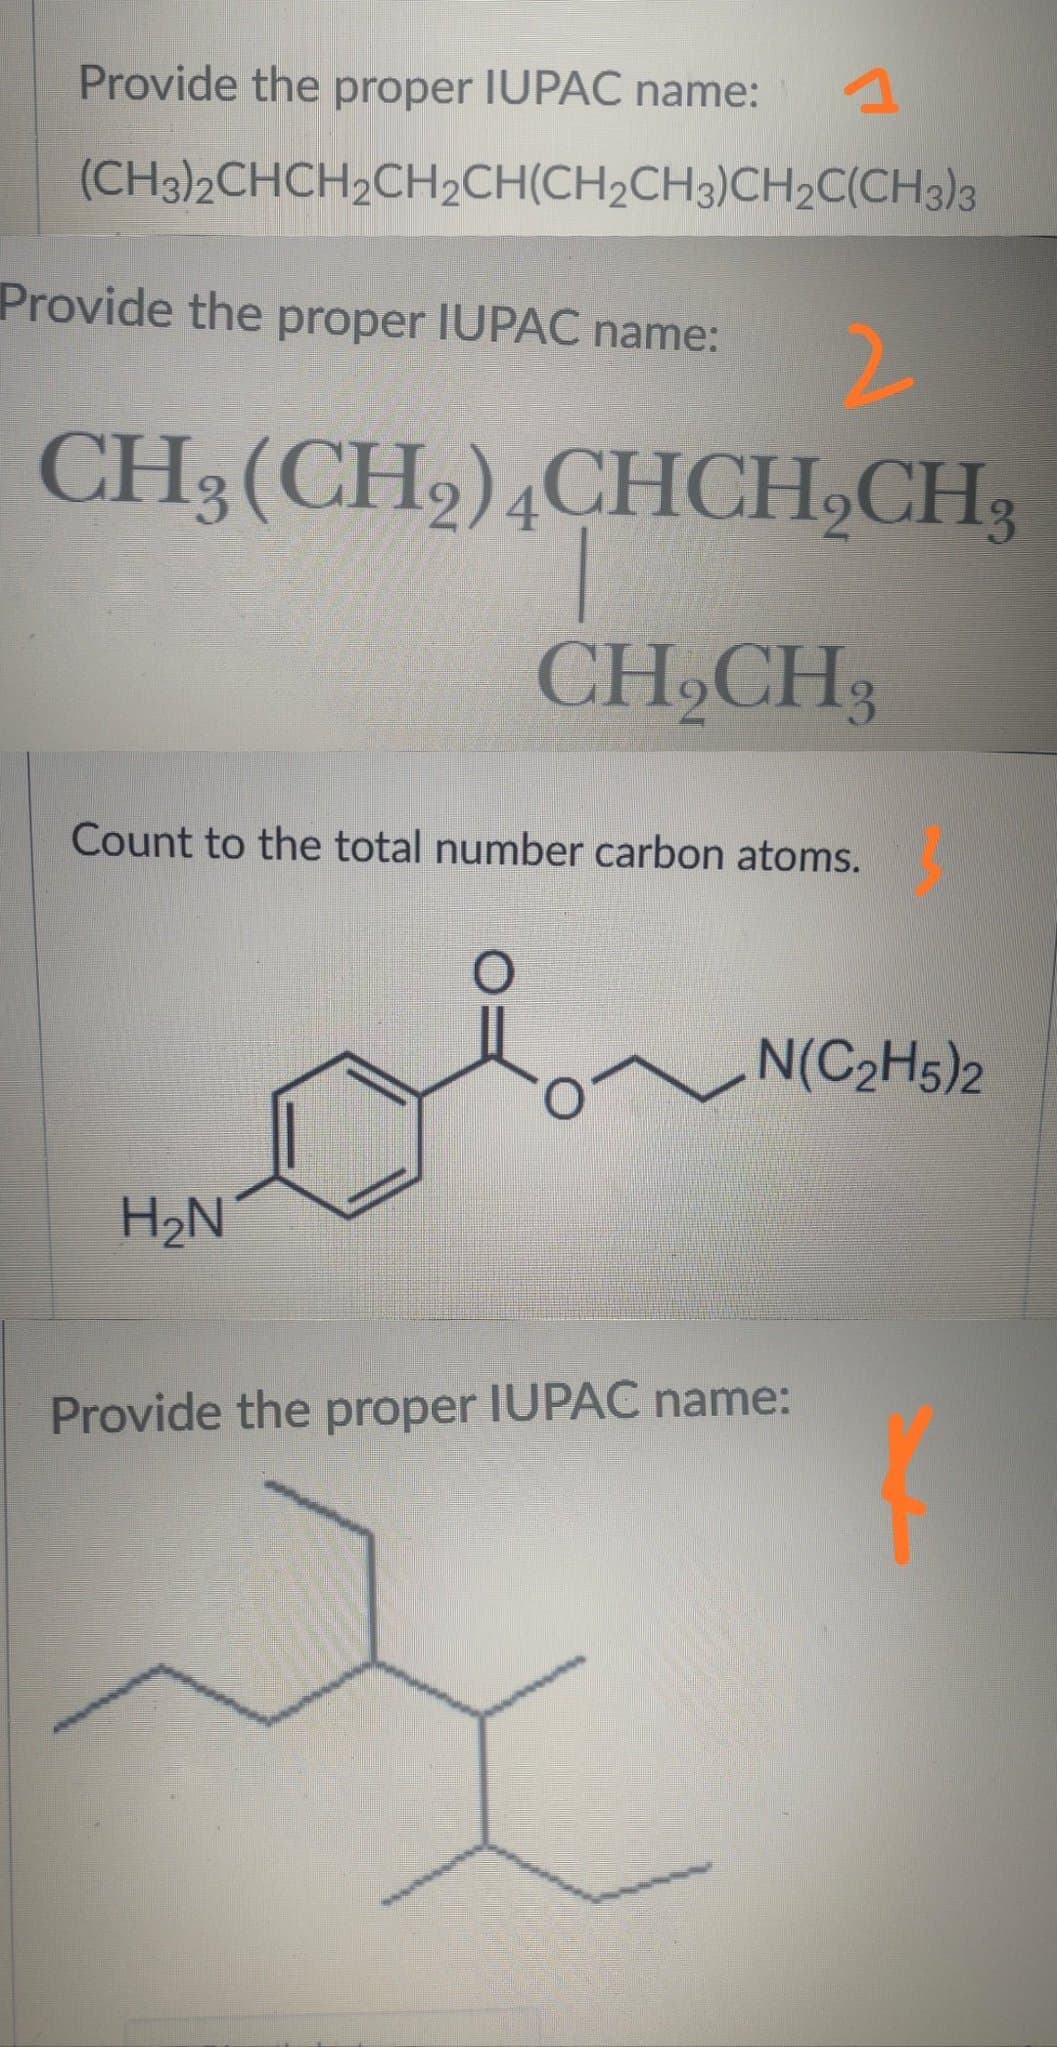 Provide the proper IUPAC name:
(CH3)2CHCH2CH2CH(CH2CH3)CH2C(CH3)3
Provide the proper IUPAC name:
CH3(CH2)4CHCH,CH;
CH,CH;
Count to the total number carbon atoms.
N(C2H5)2
H2N
Provide the proper IUPAC name:
